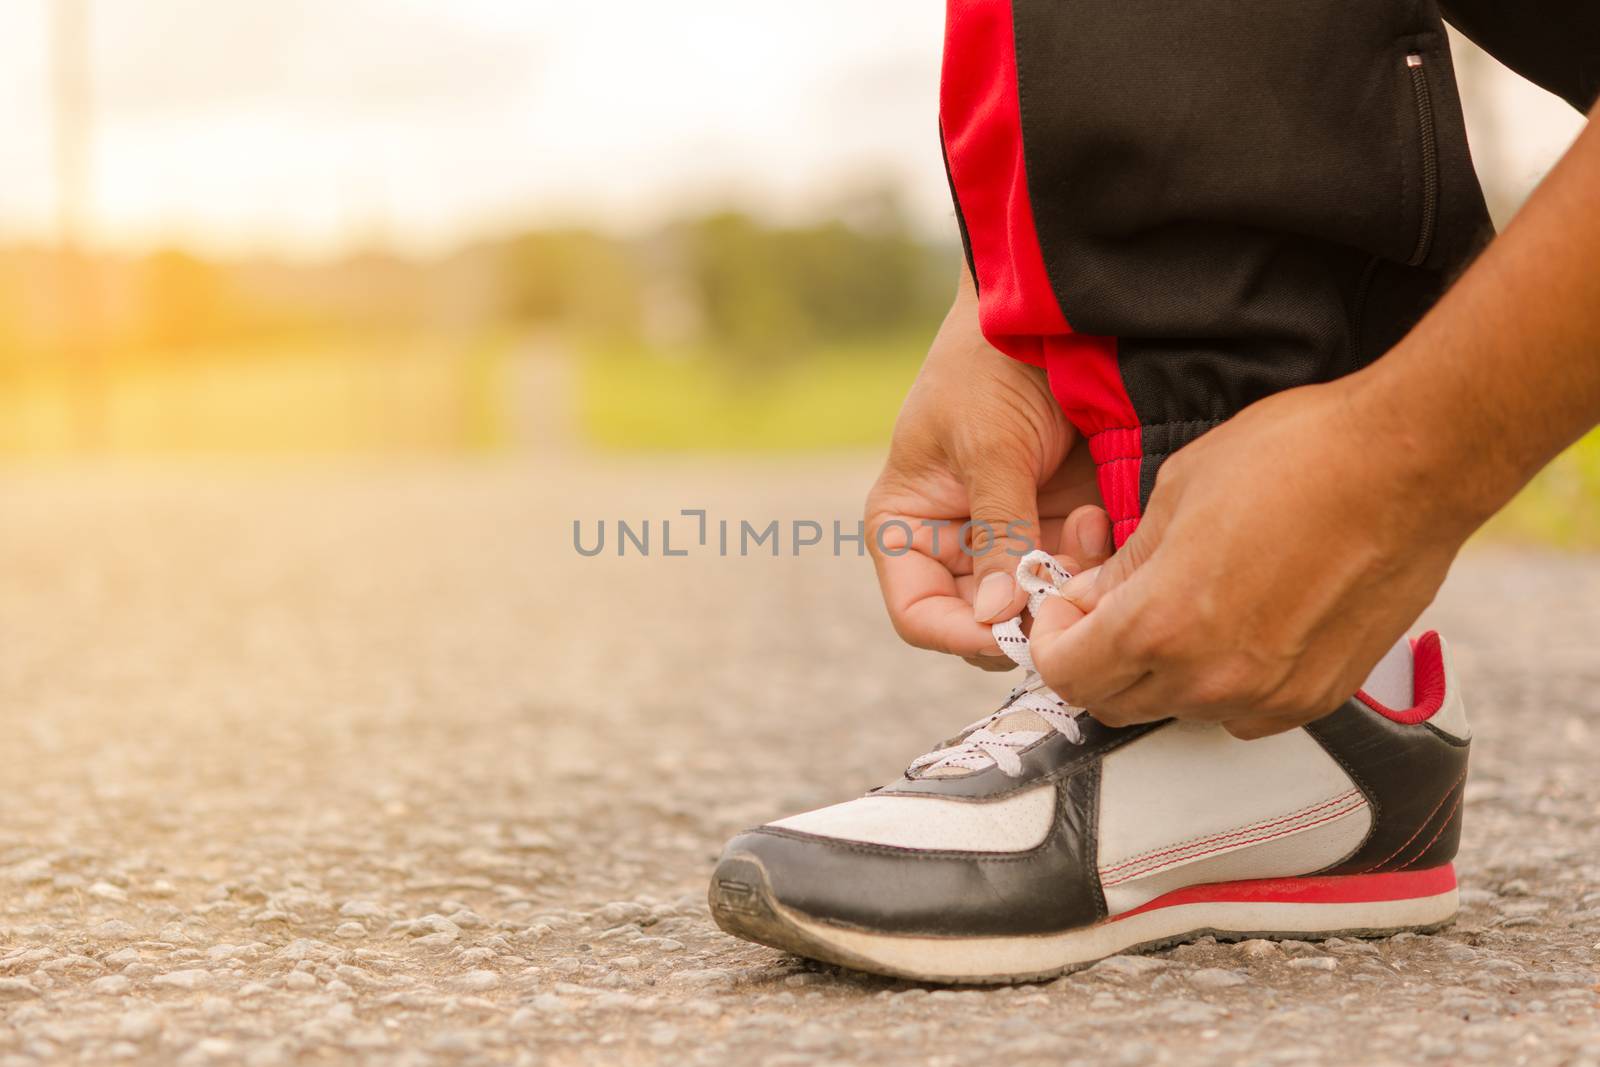 Man  tying shoes at roadside.Or sport man tying shoes. by engphoto